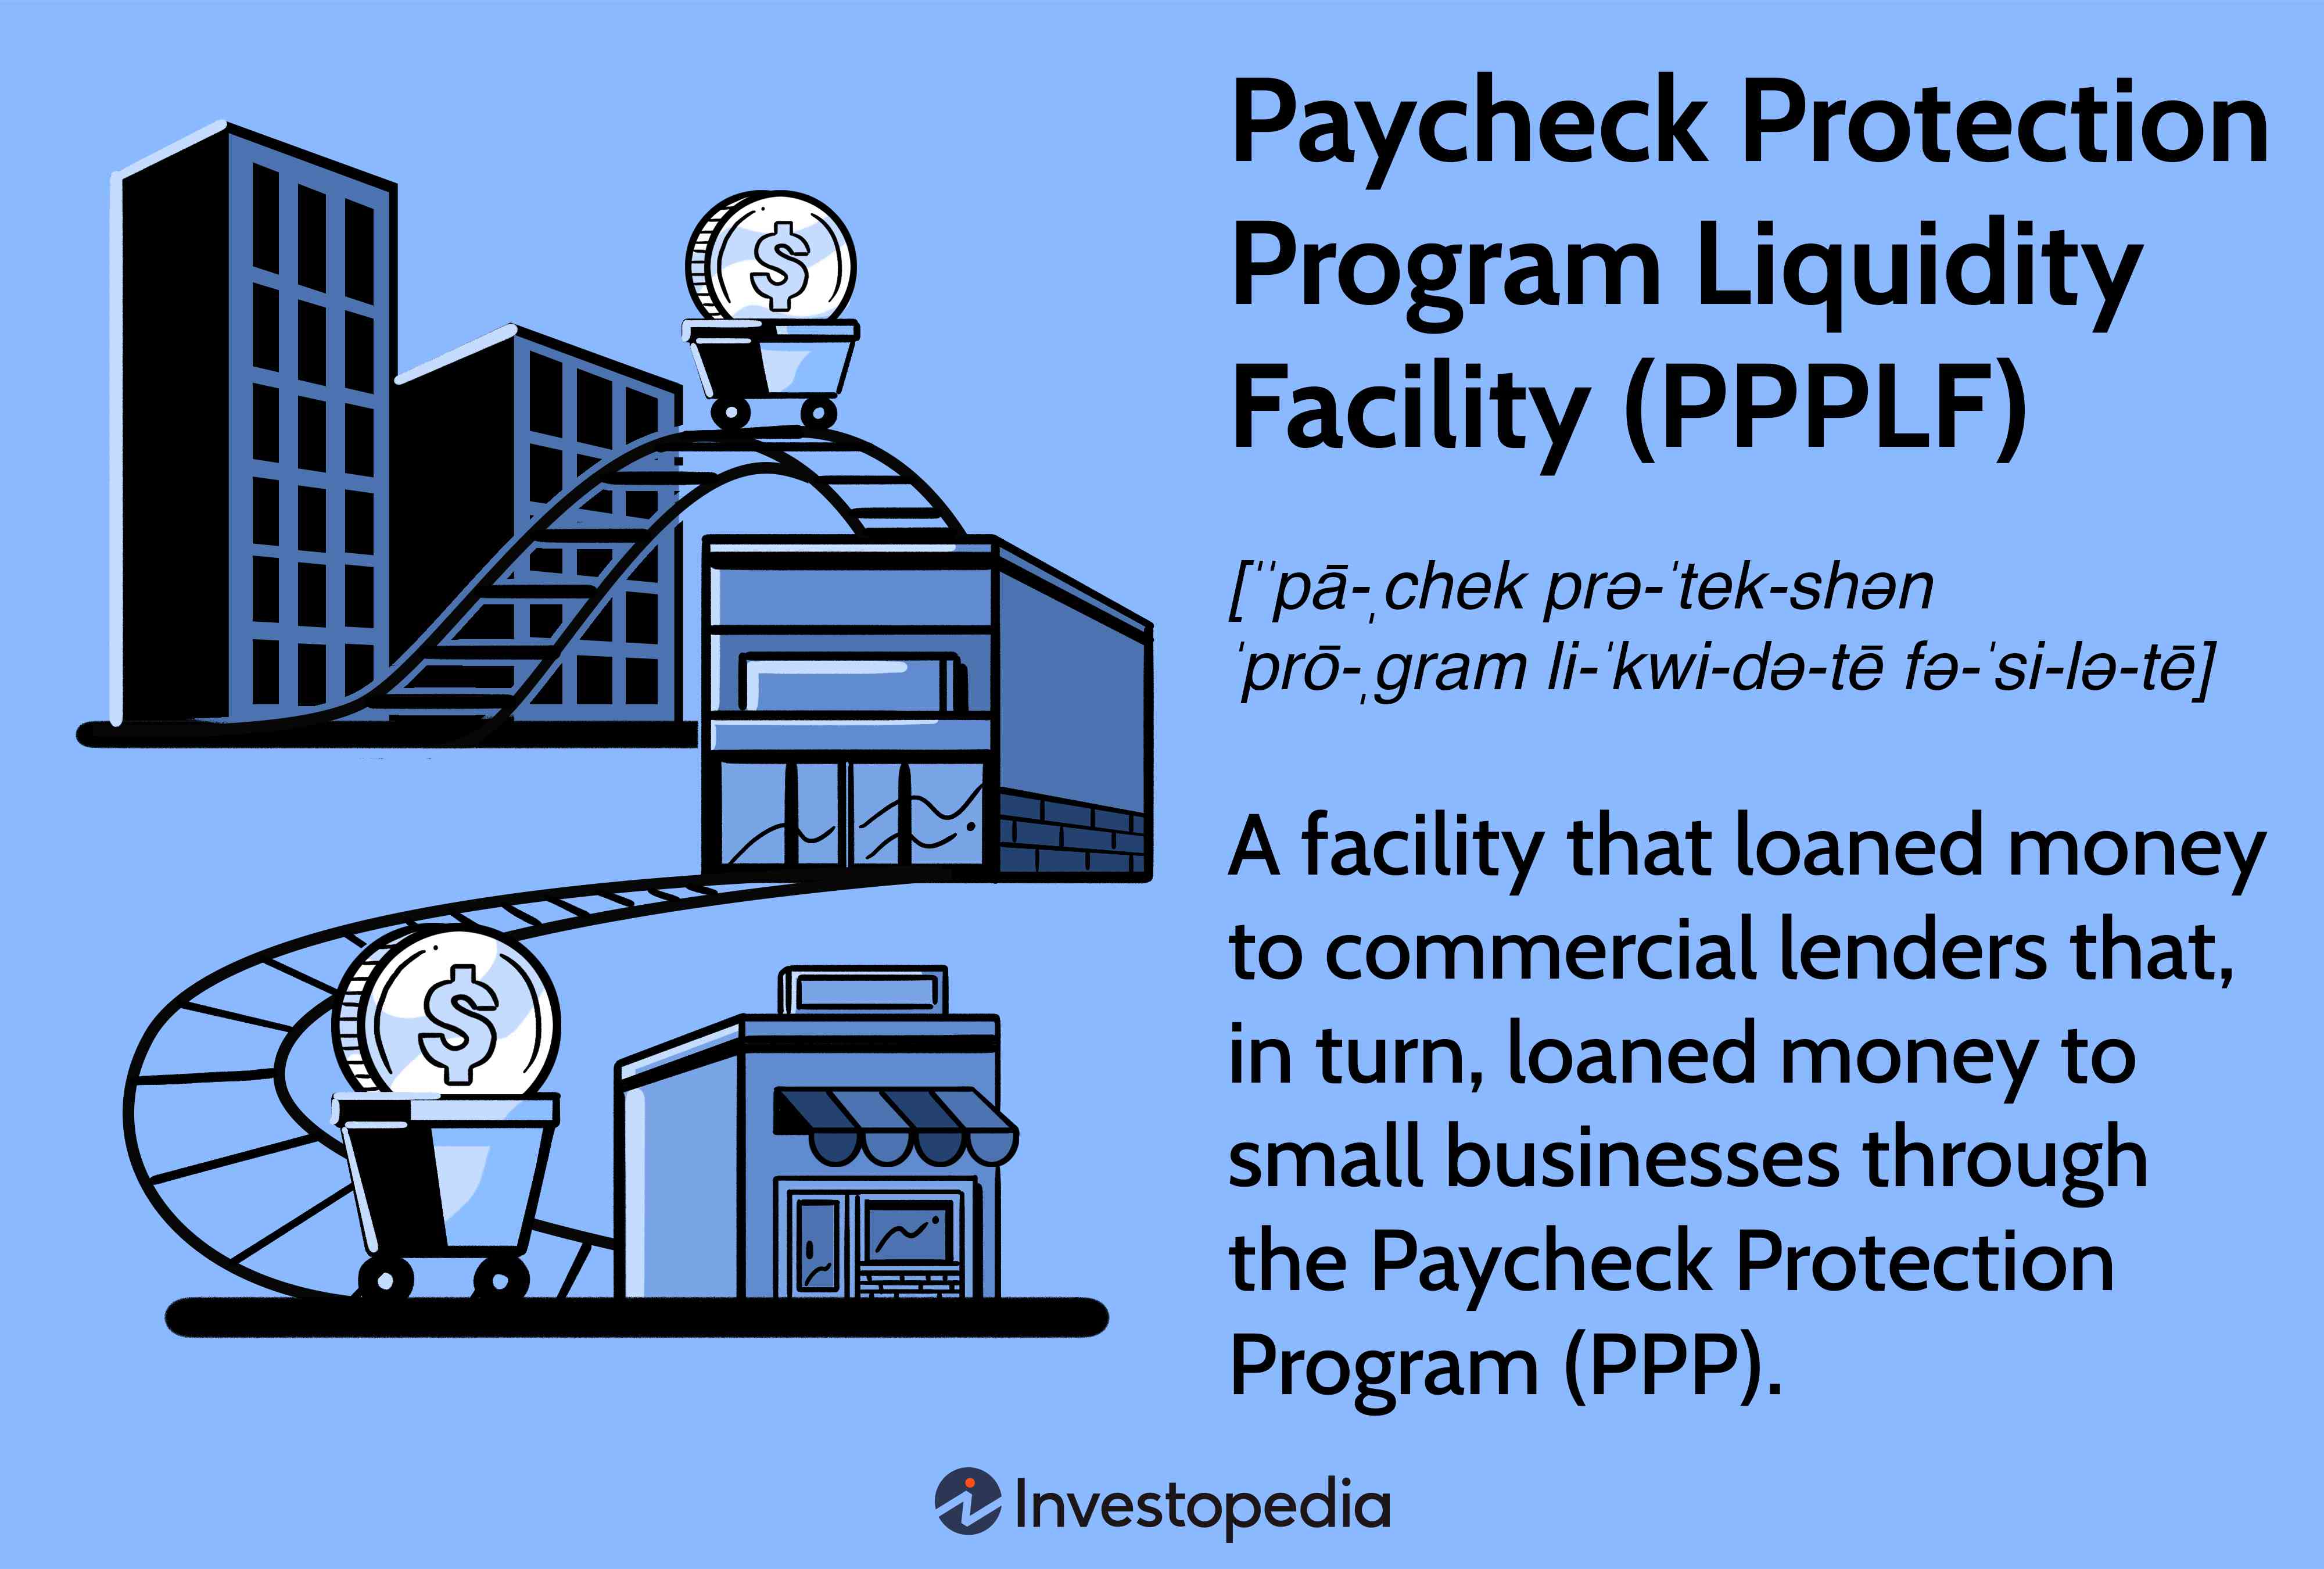 Paycheck Protection Program Liquidity Facility (PPPLF)